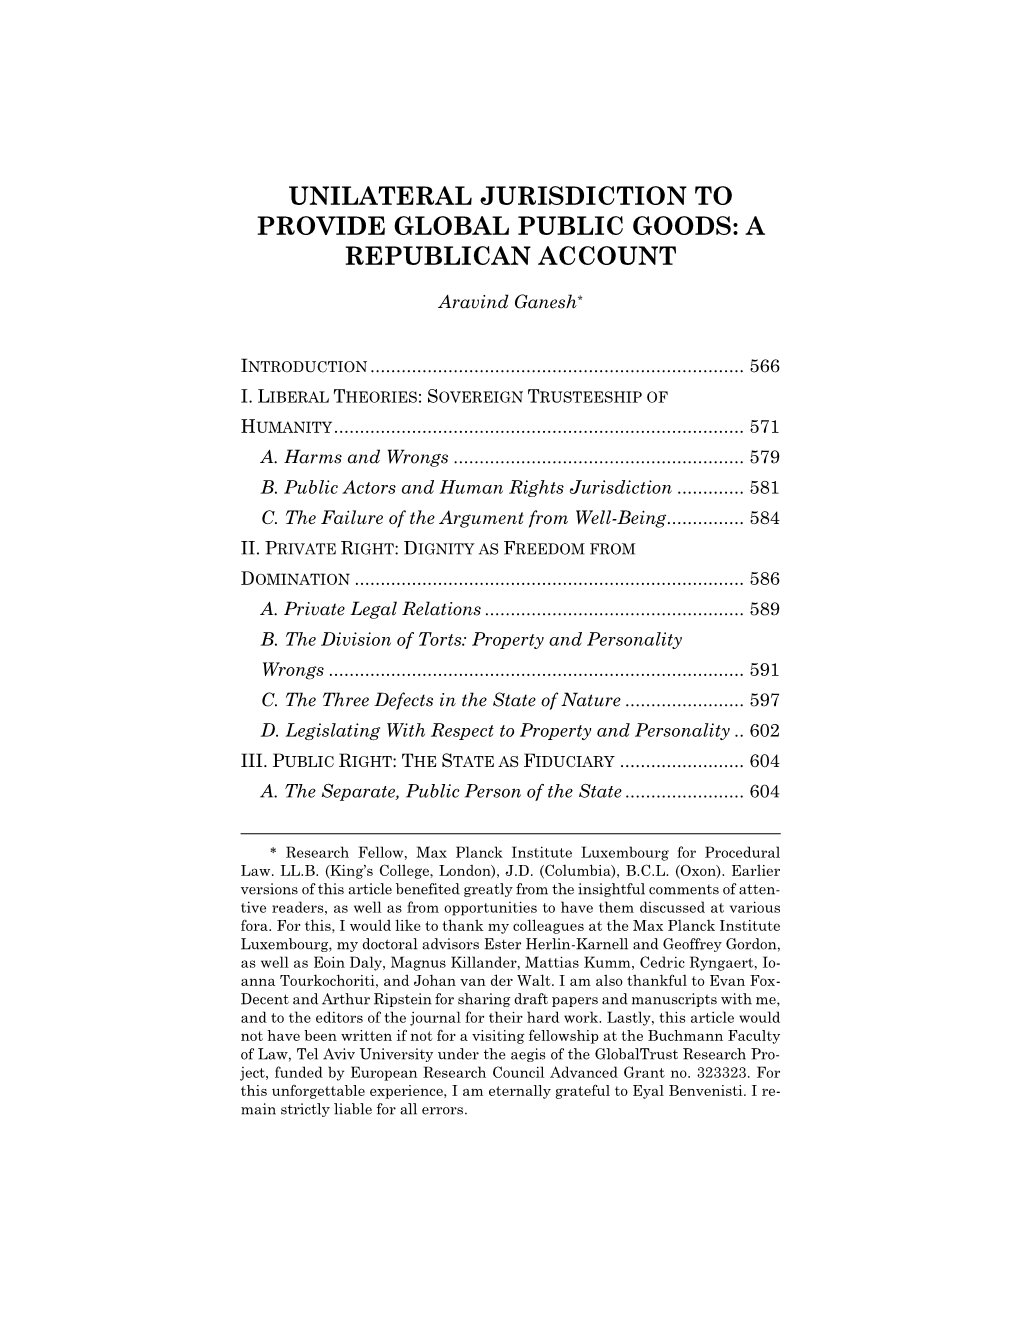 Unilateral Jurisdiction to Provide Global Public Goods: a Republican Account